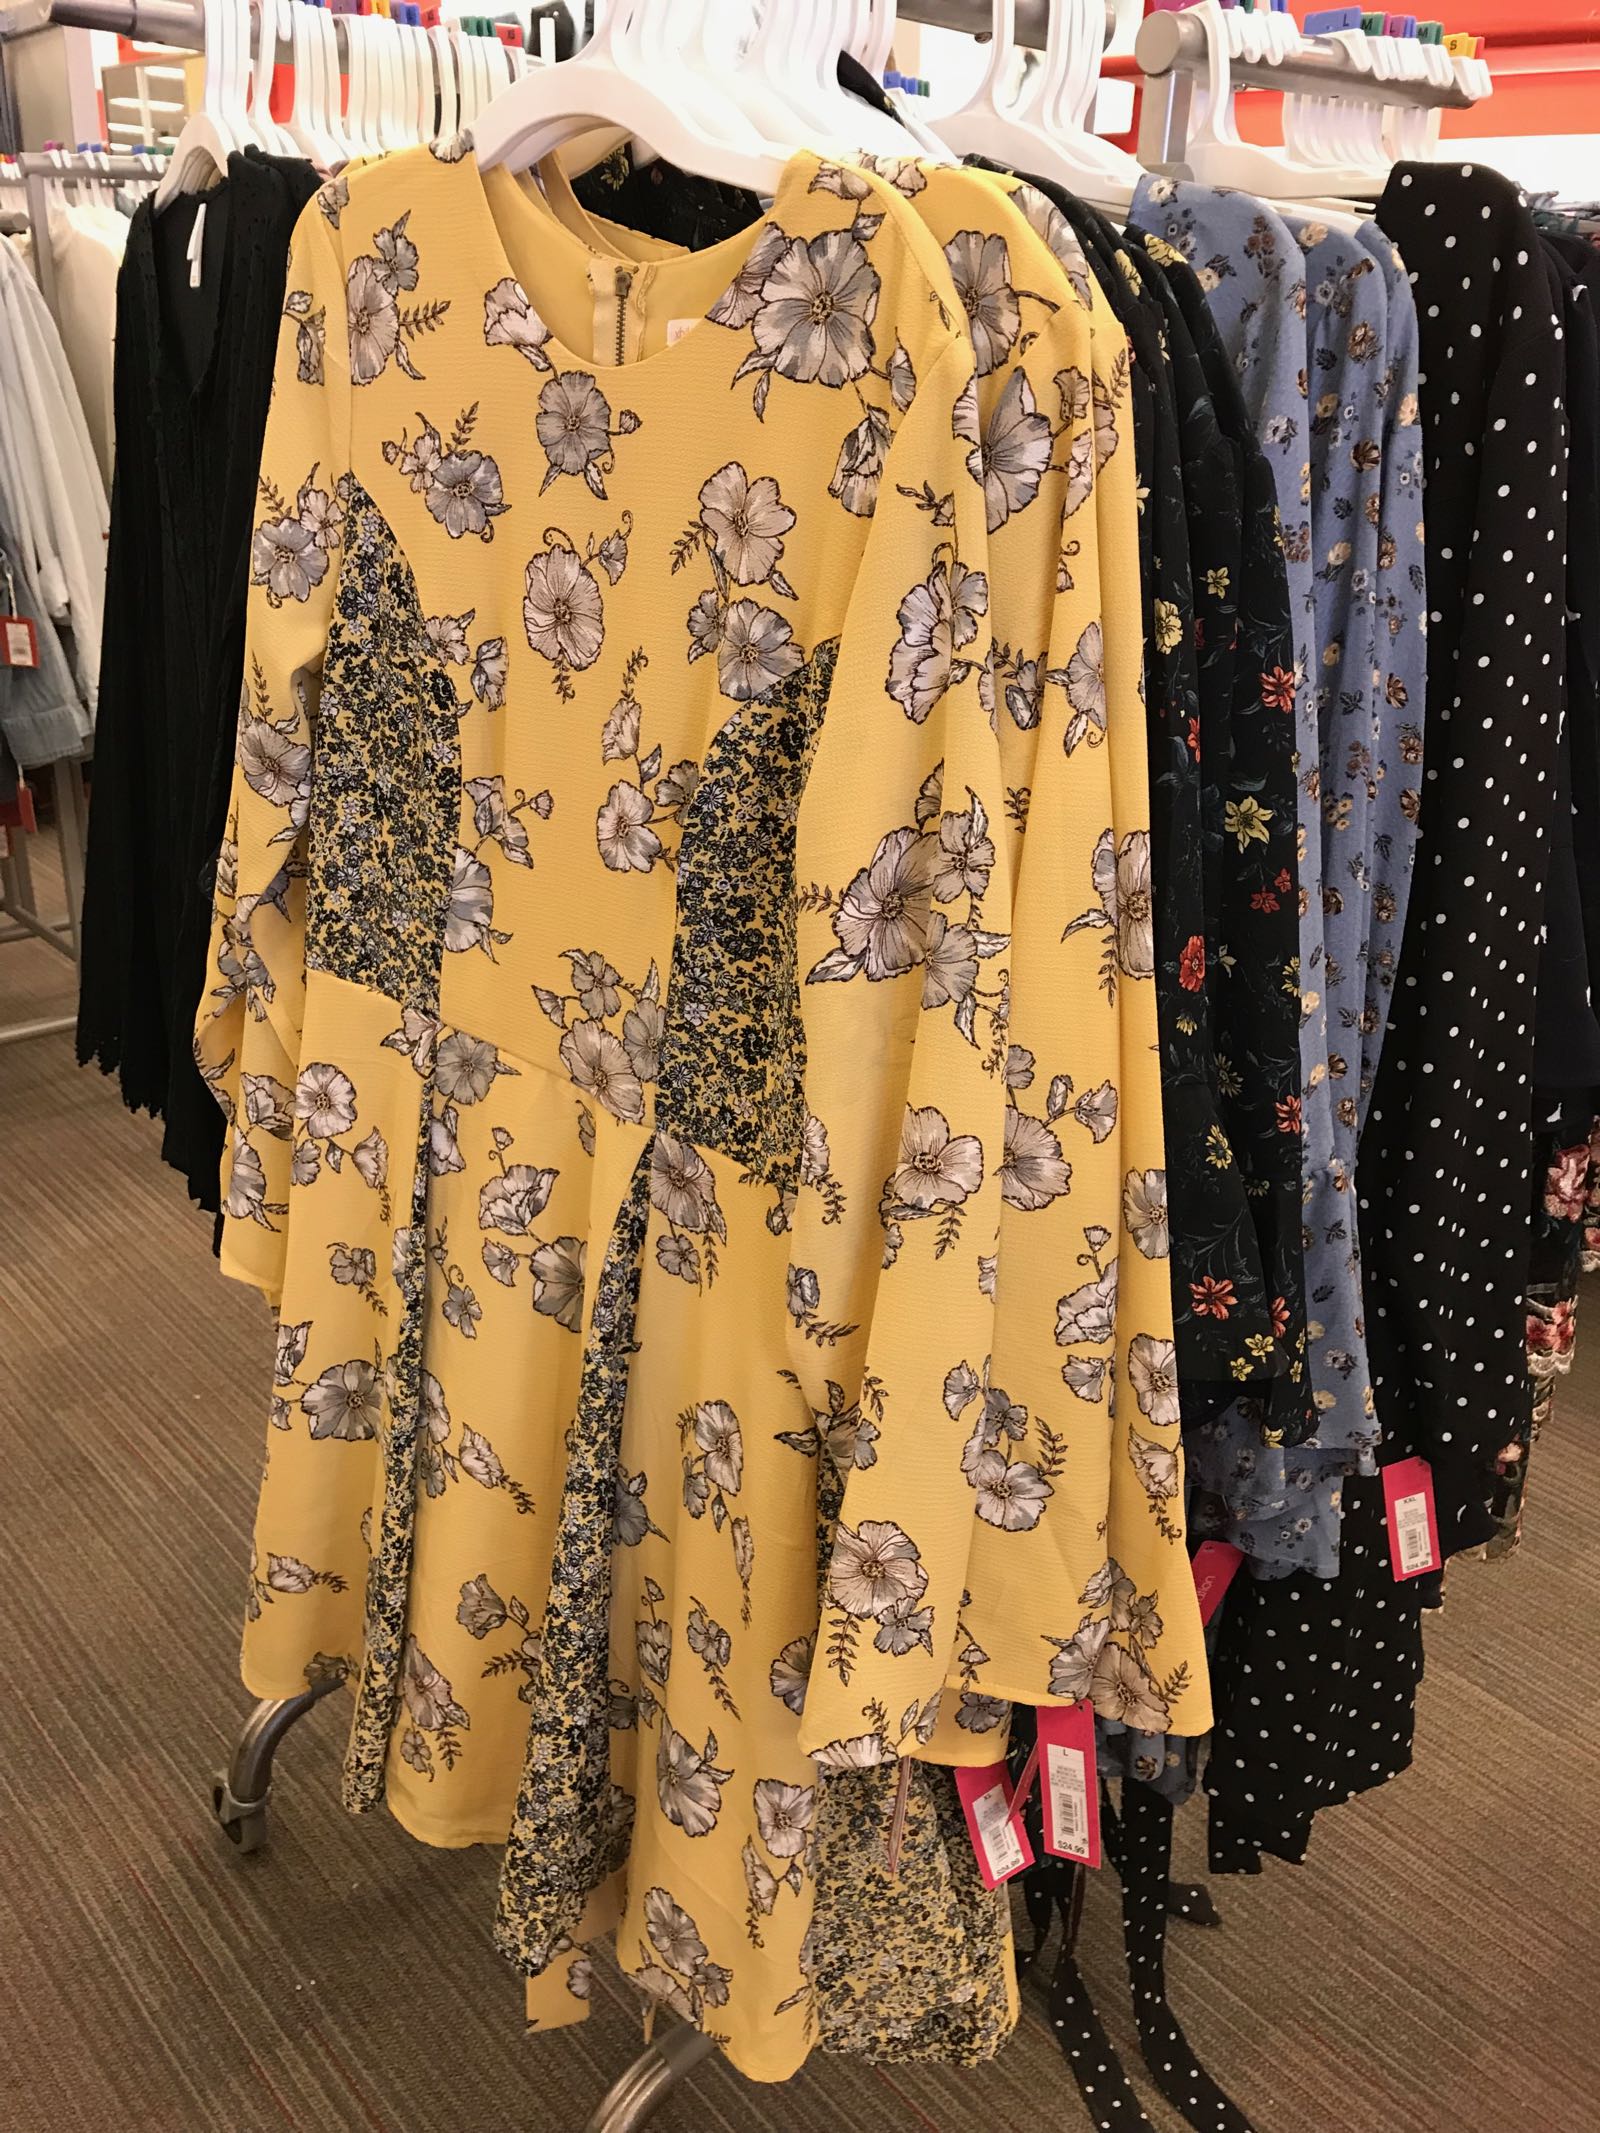 The cutest spring fashions at Target, from kimonos to babydoll dresses - and maternity styles too